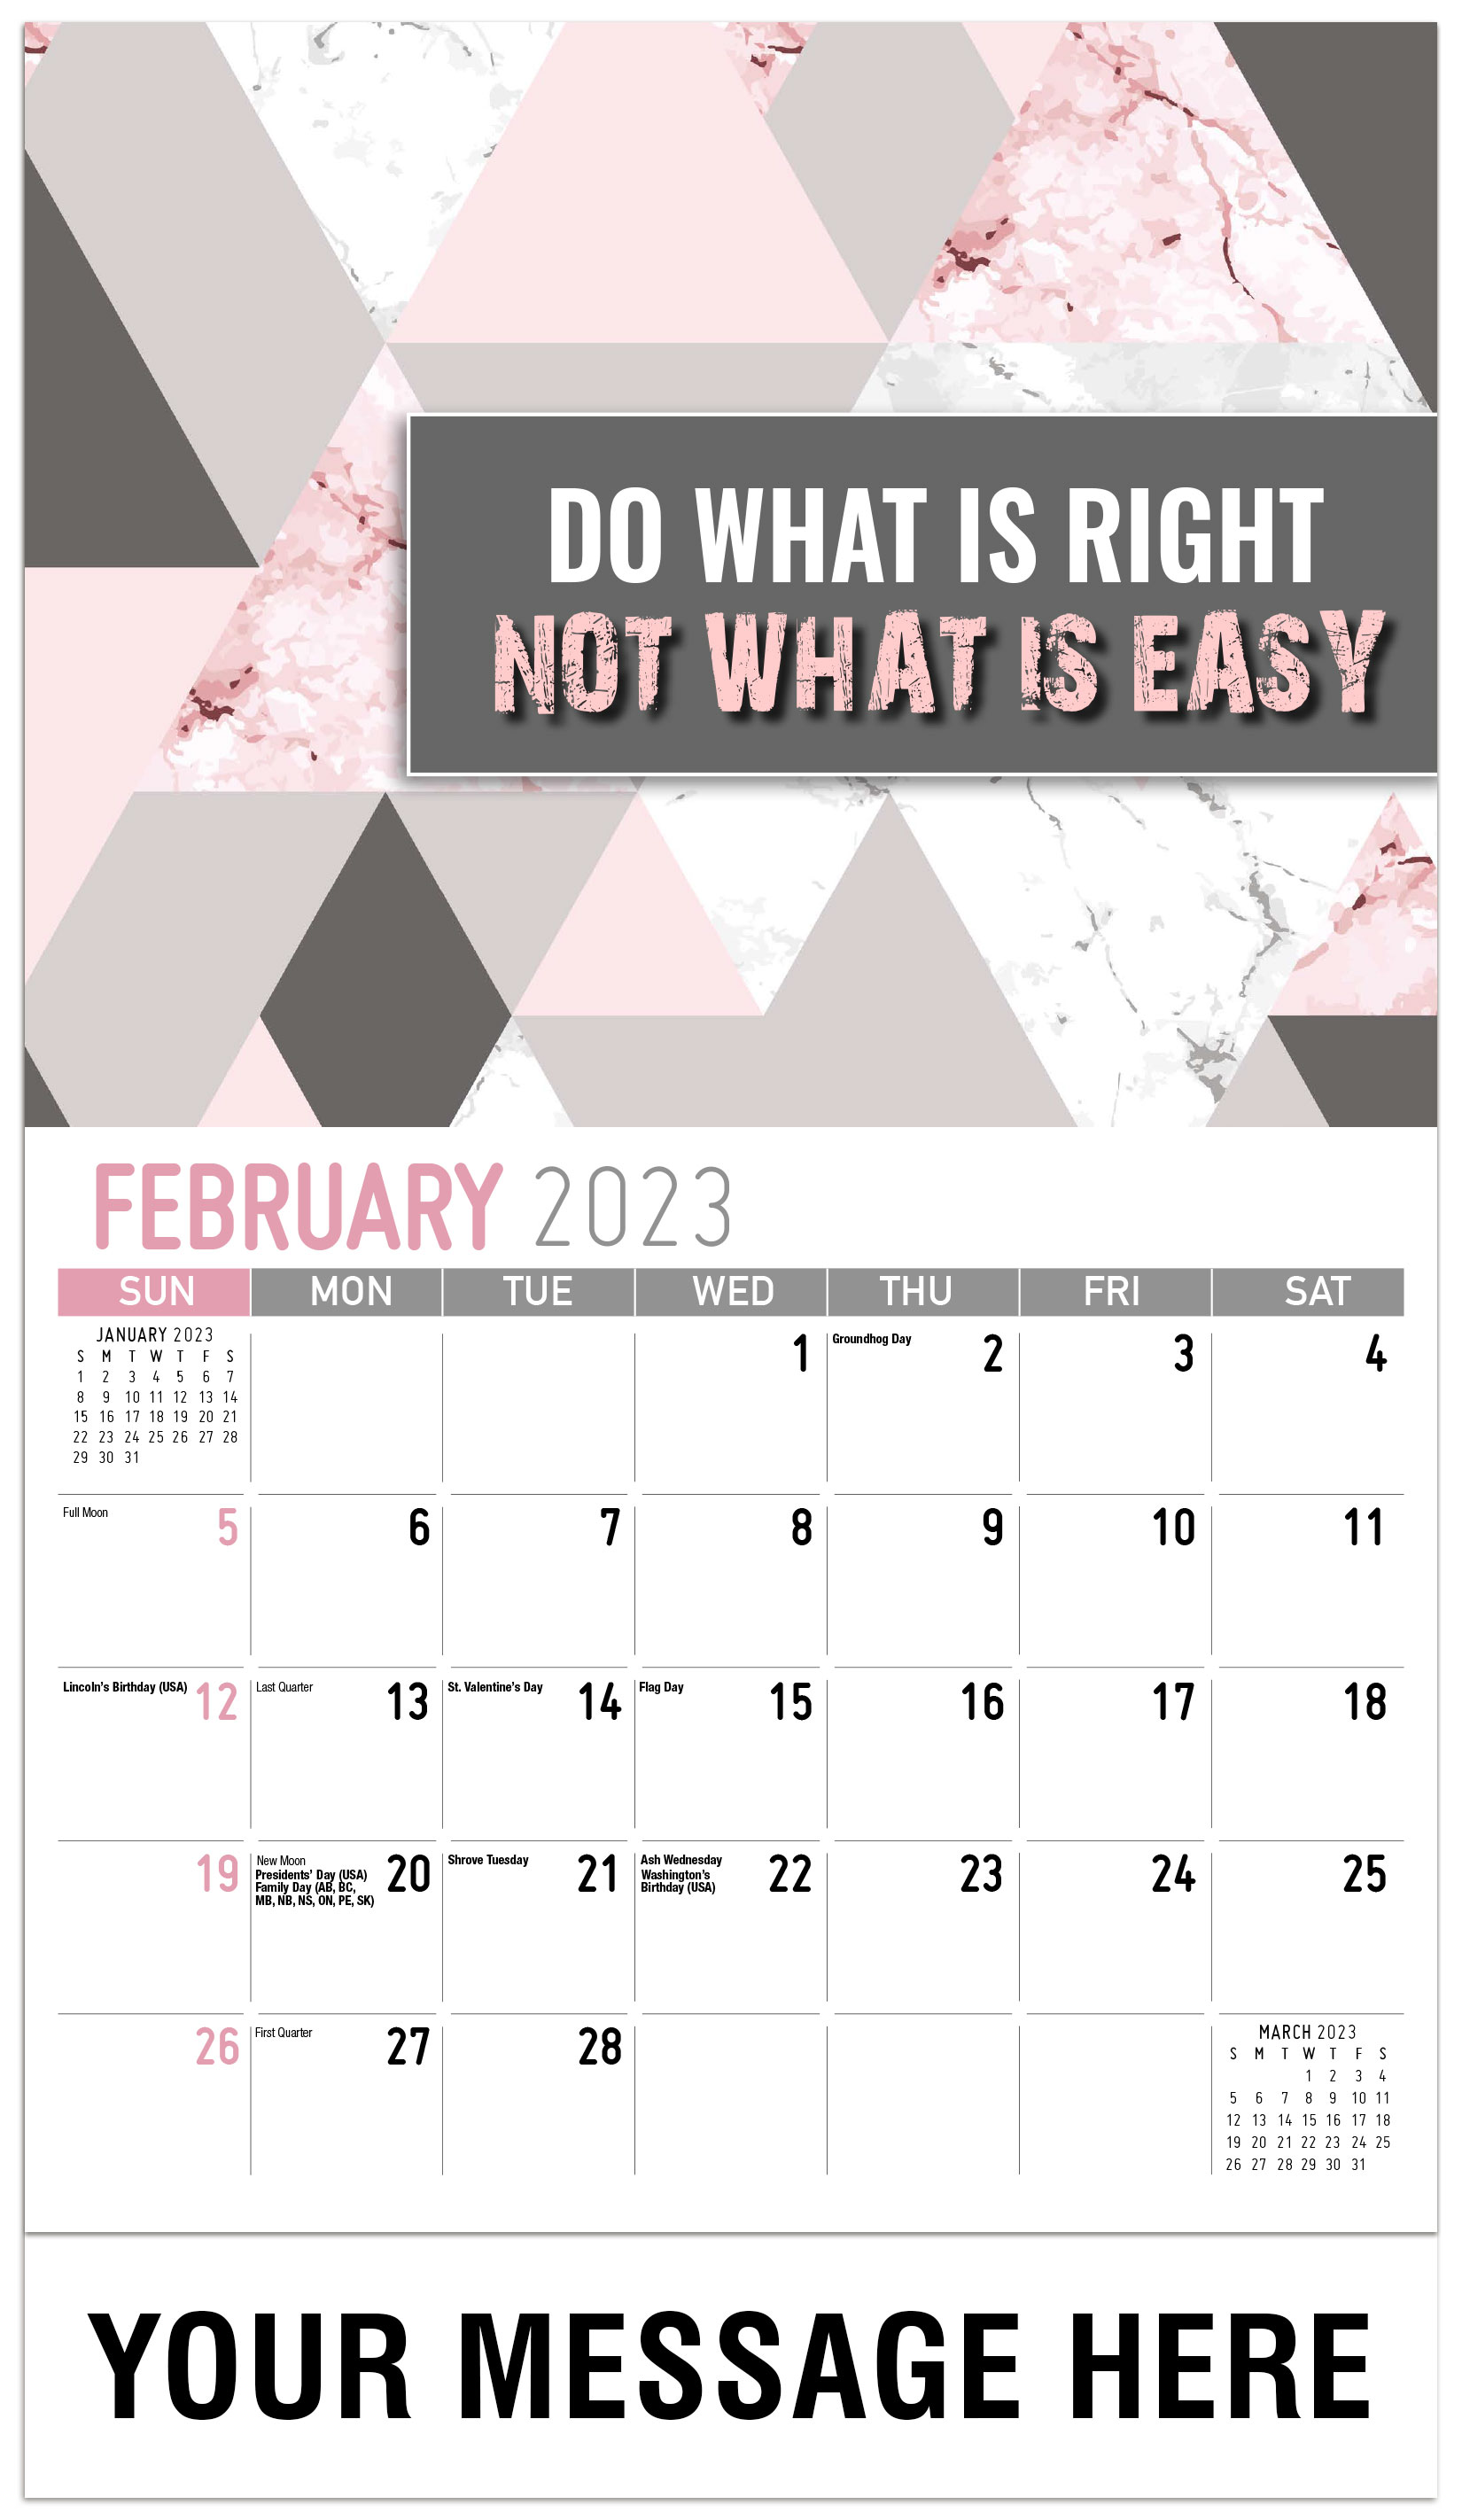 Do What Is Right 
Not What Is Easy - February - Arts and Thoughts 2023 Promotional Calendar